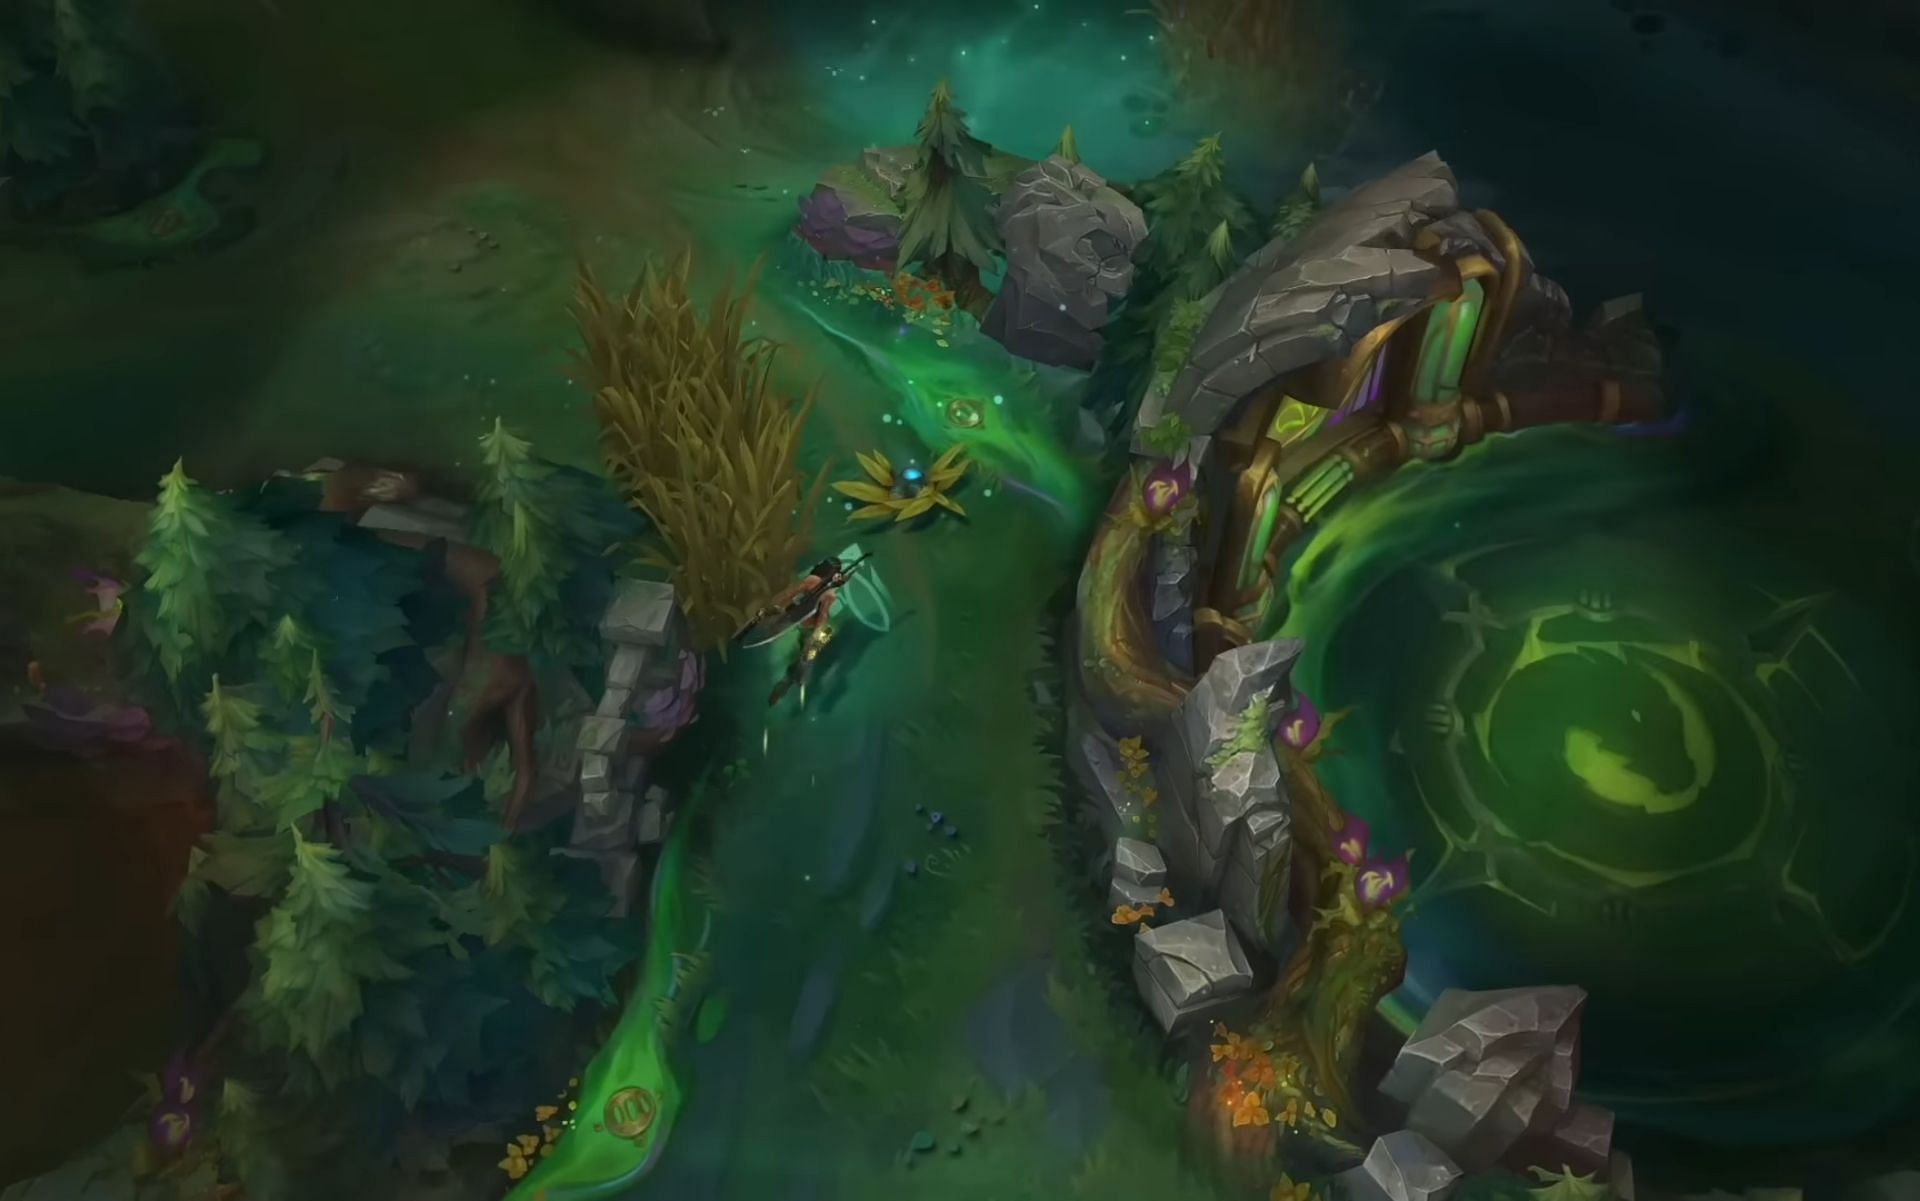 Chemtech Drake is set to make its return along with League of Legends' pre-season 2023